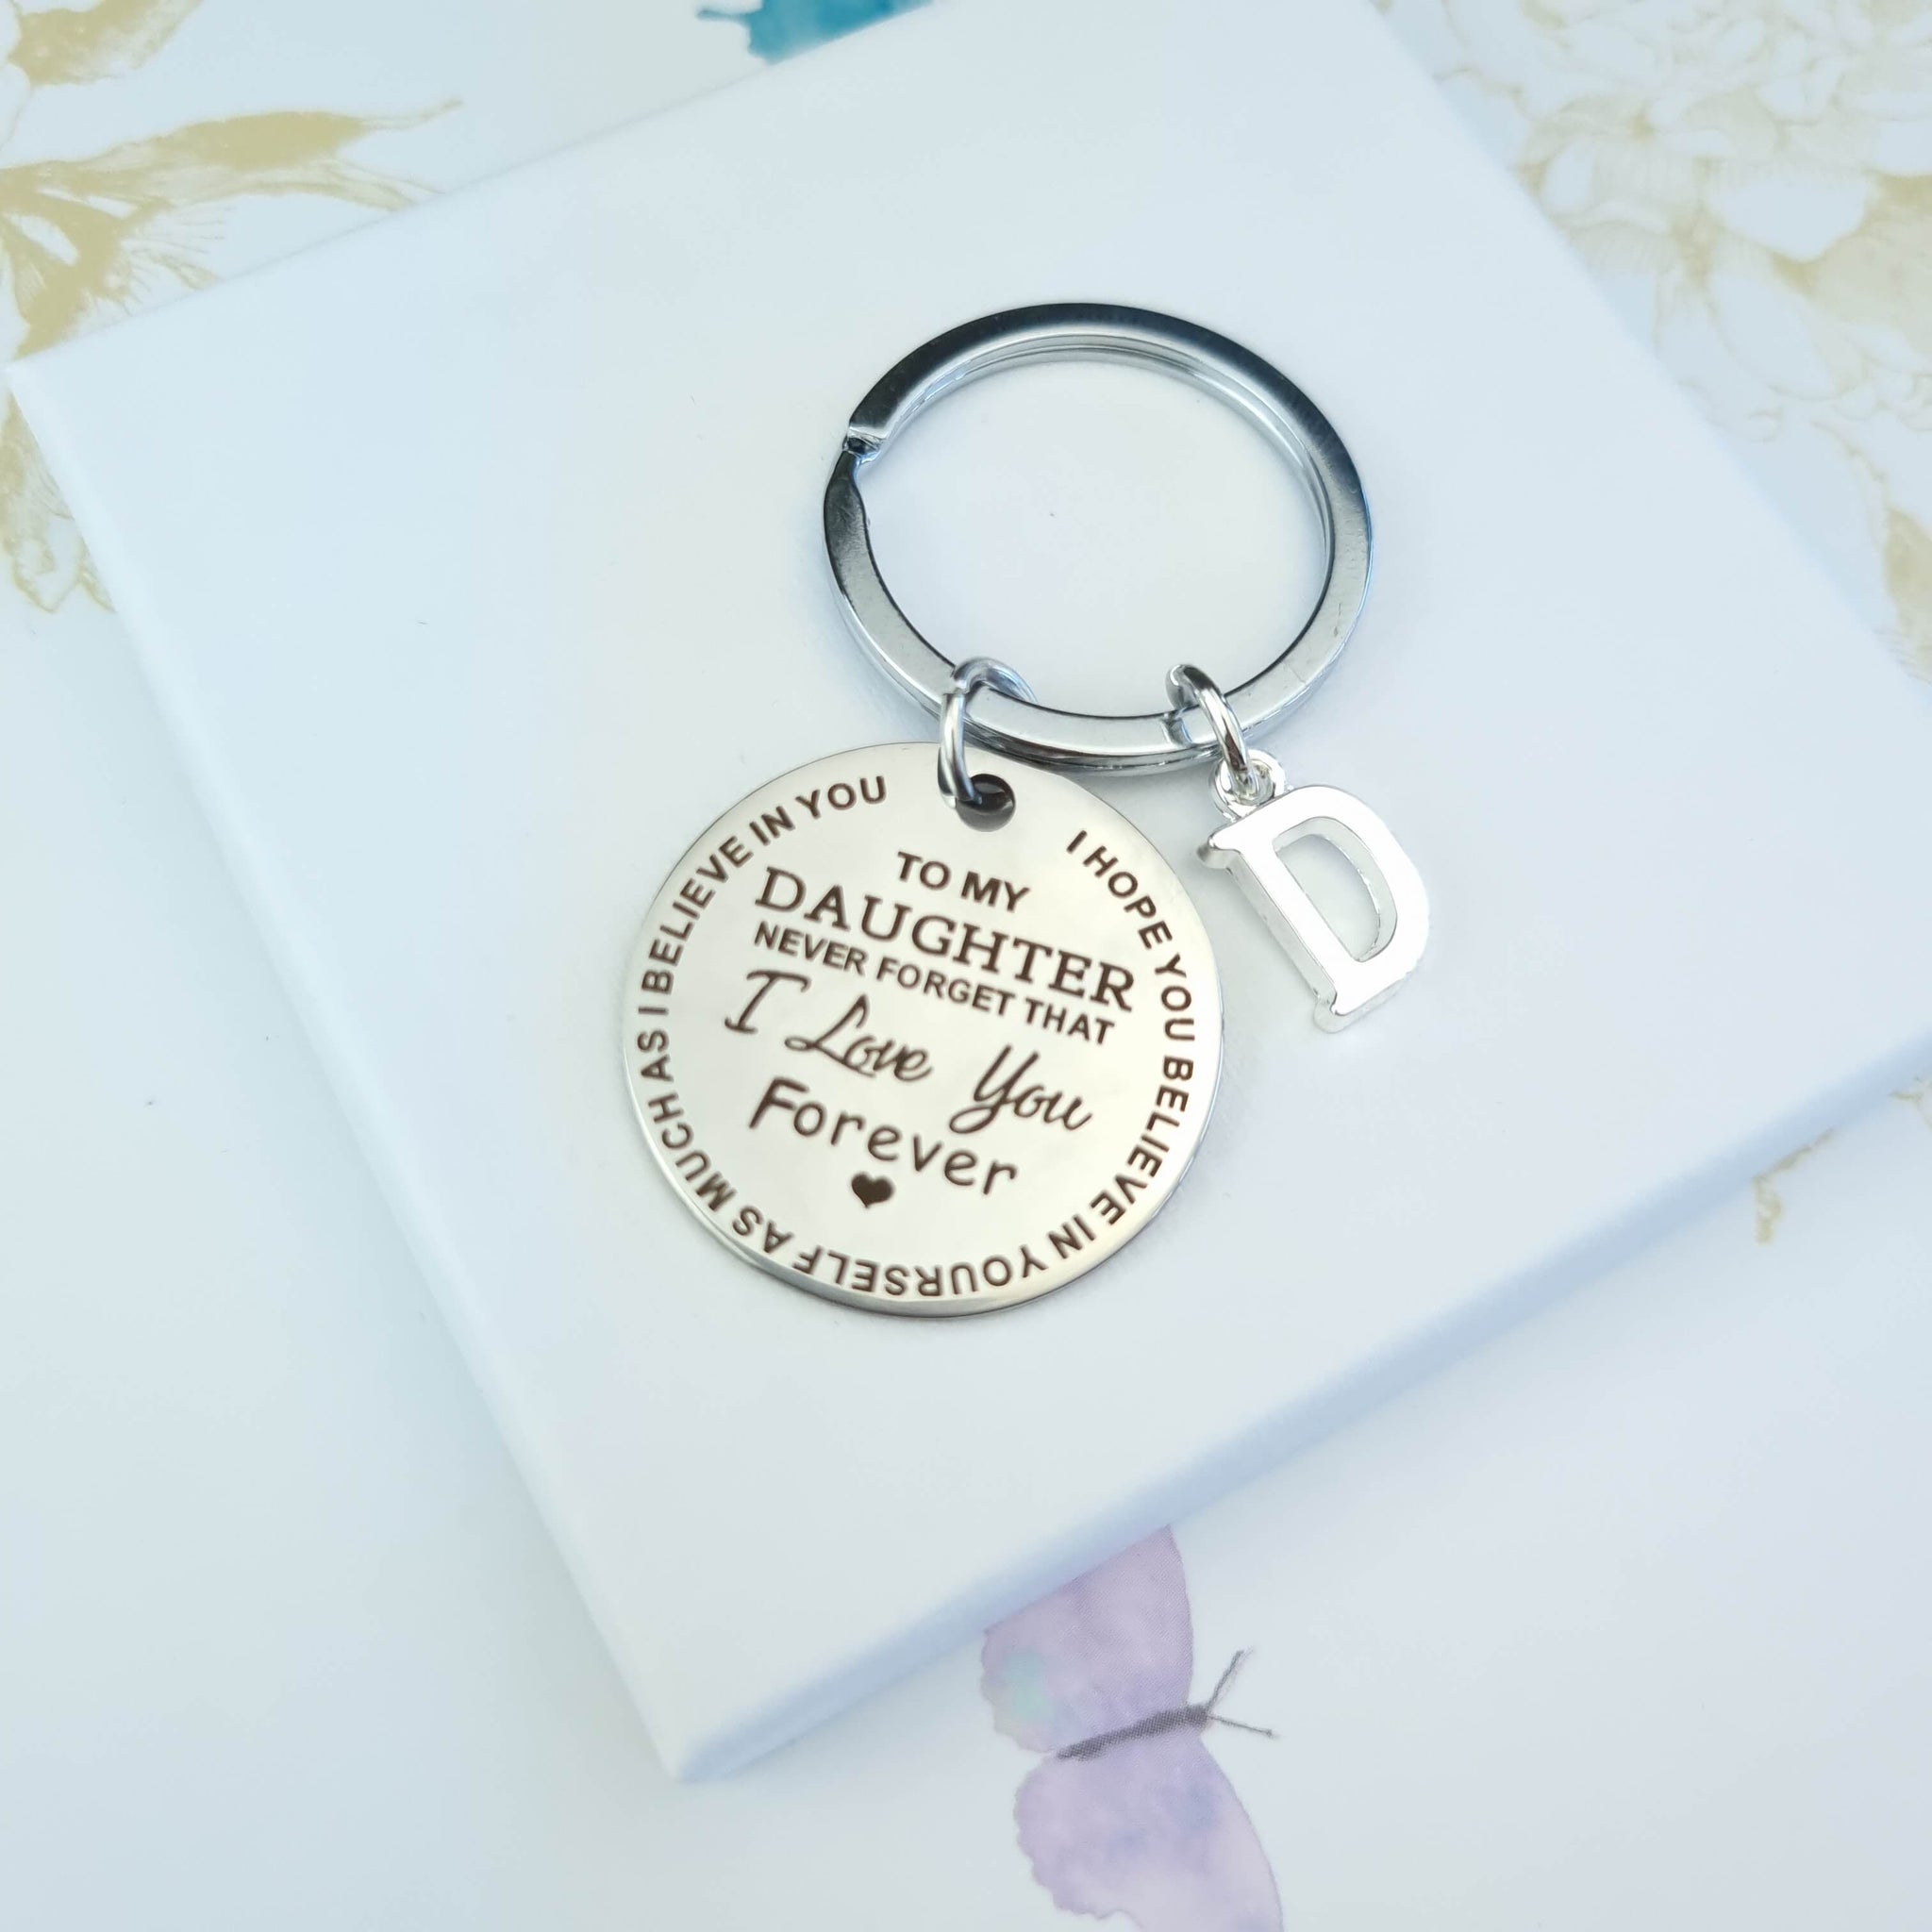 daughter keyring personalised with initial and engraved with quote